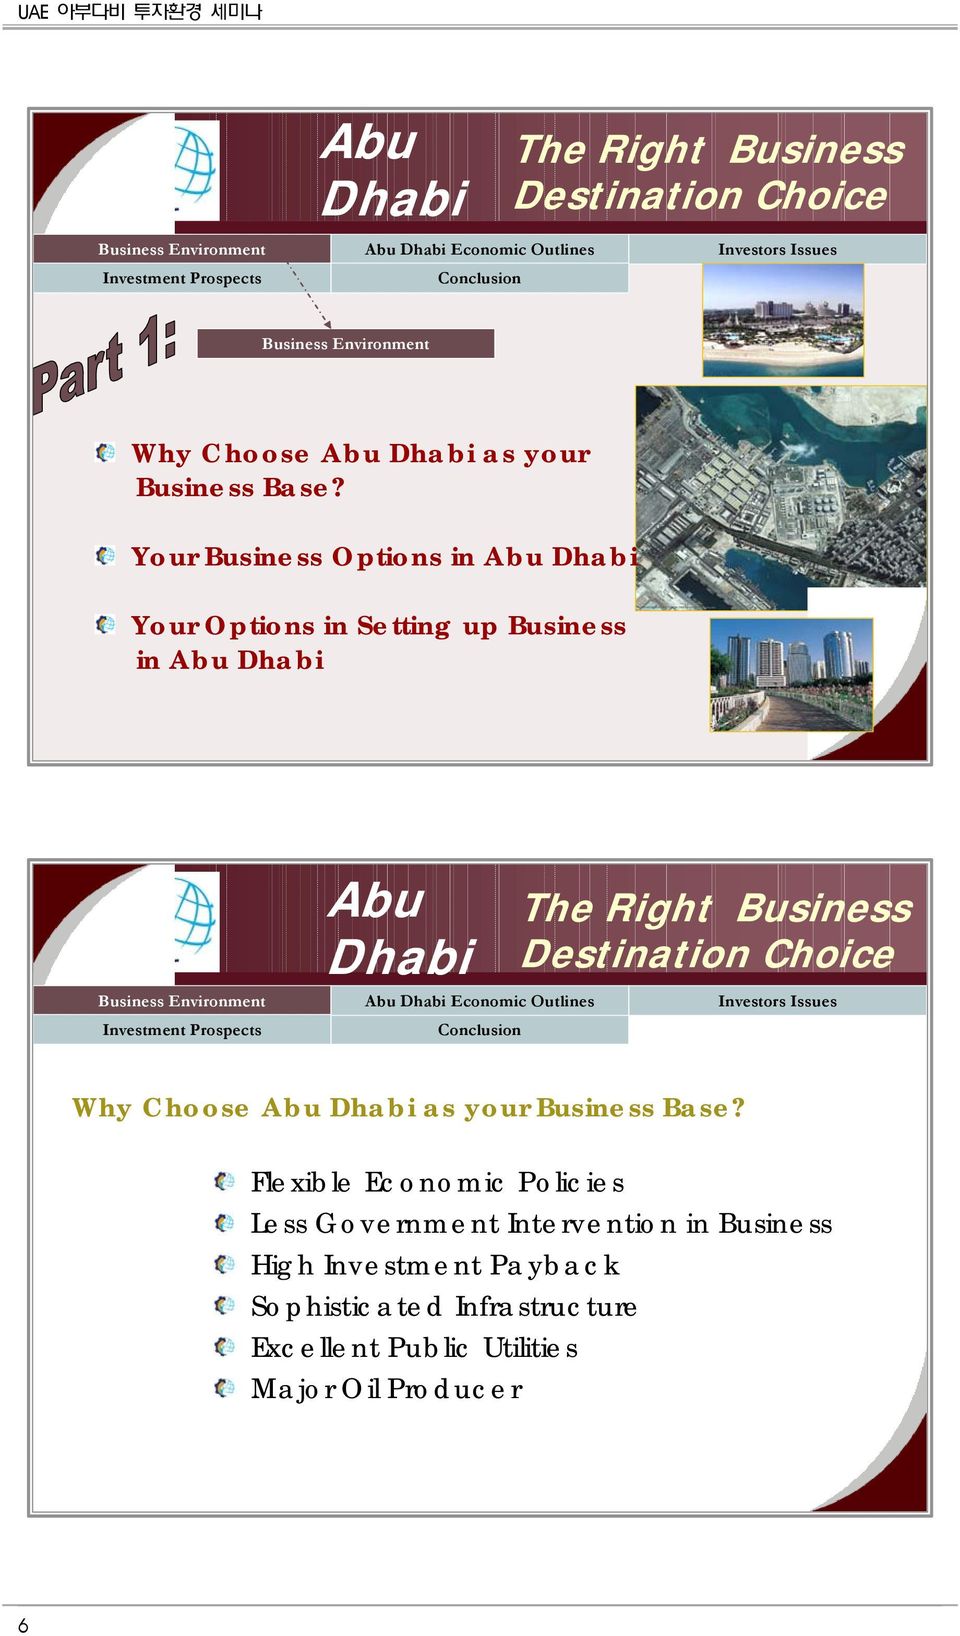 Your Business Options in Abu Dhabi Your Options in Setting up Business in Abu Dhabi Business Environment Investment Prospects Abu Dhabi Abu Dhabi Economic Outlines